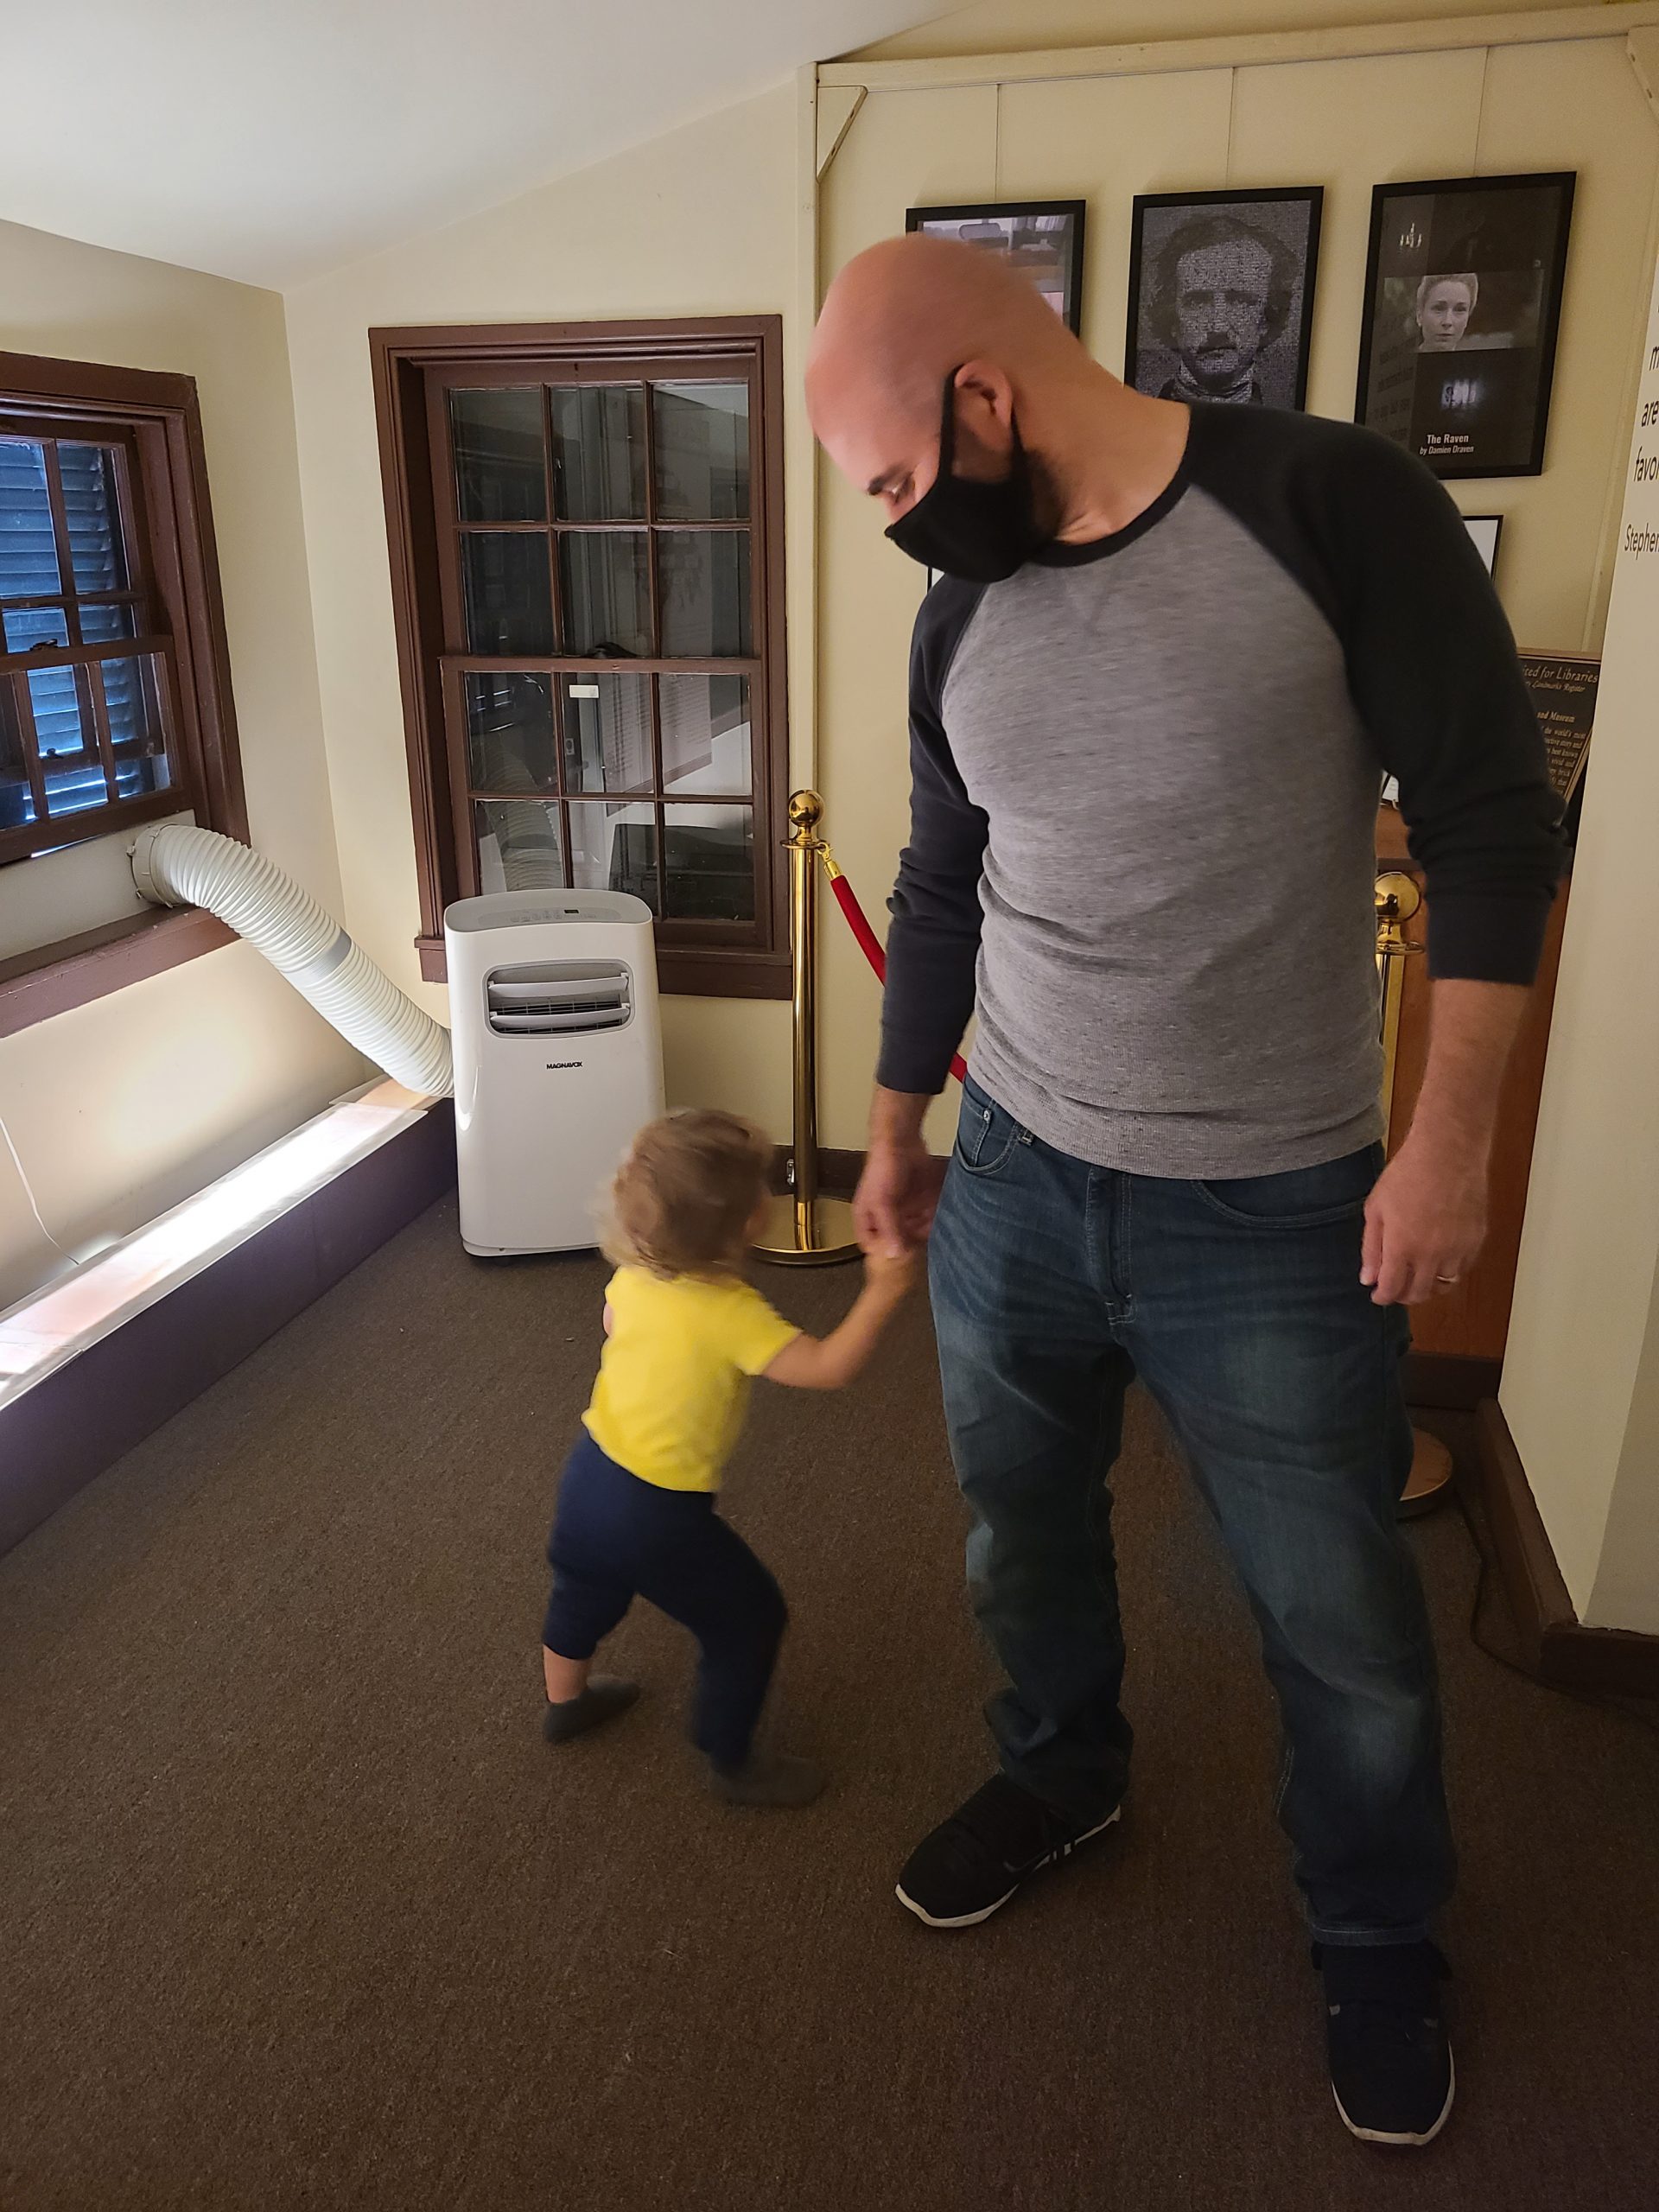 A man and child walking around in the Edgar Allan Poe house